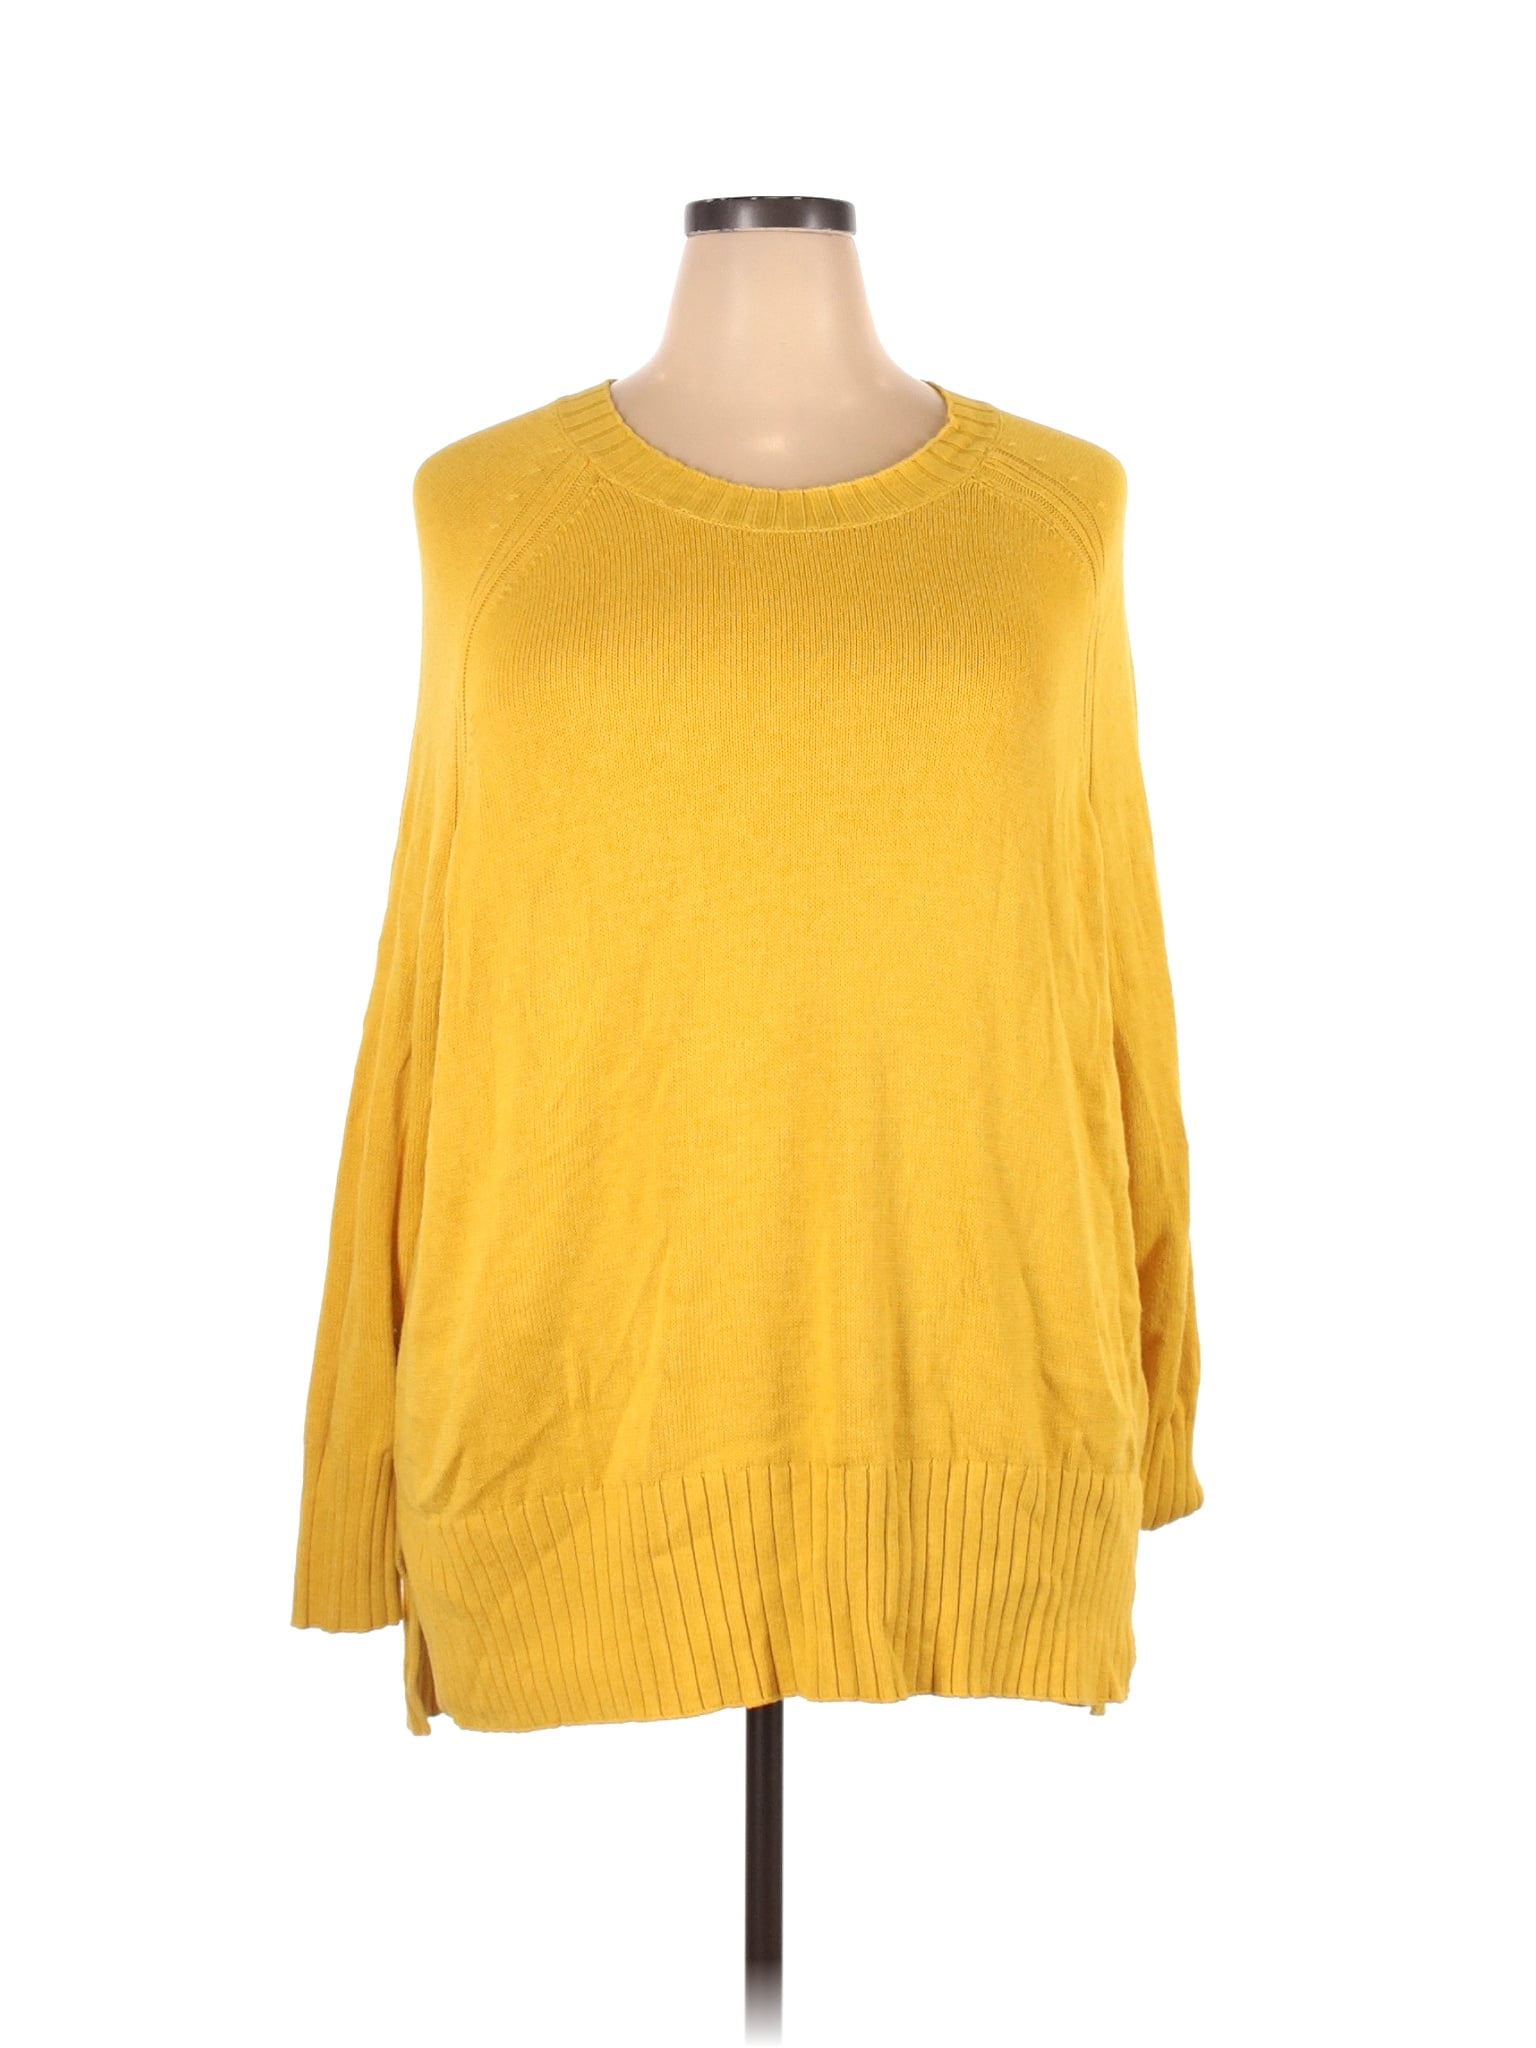 Old Navy Color Block Solid Yellow Pullover Sweater Size 2X (Plus) - 46% ...